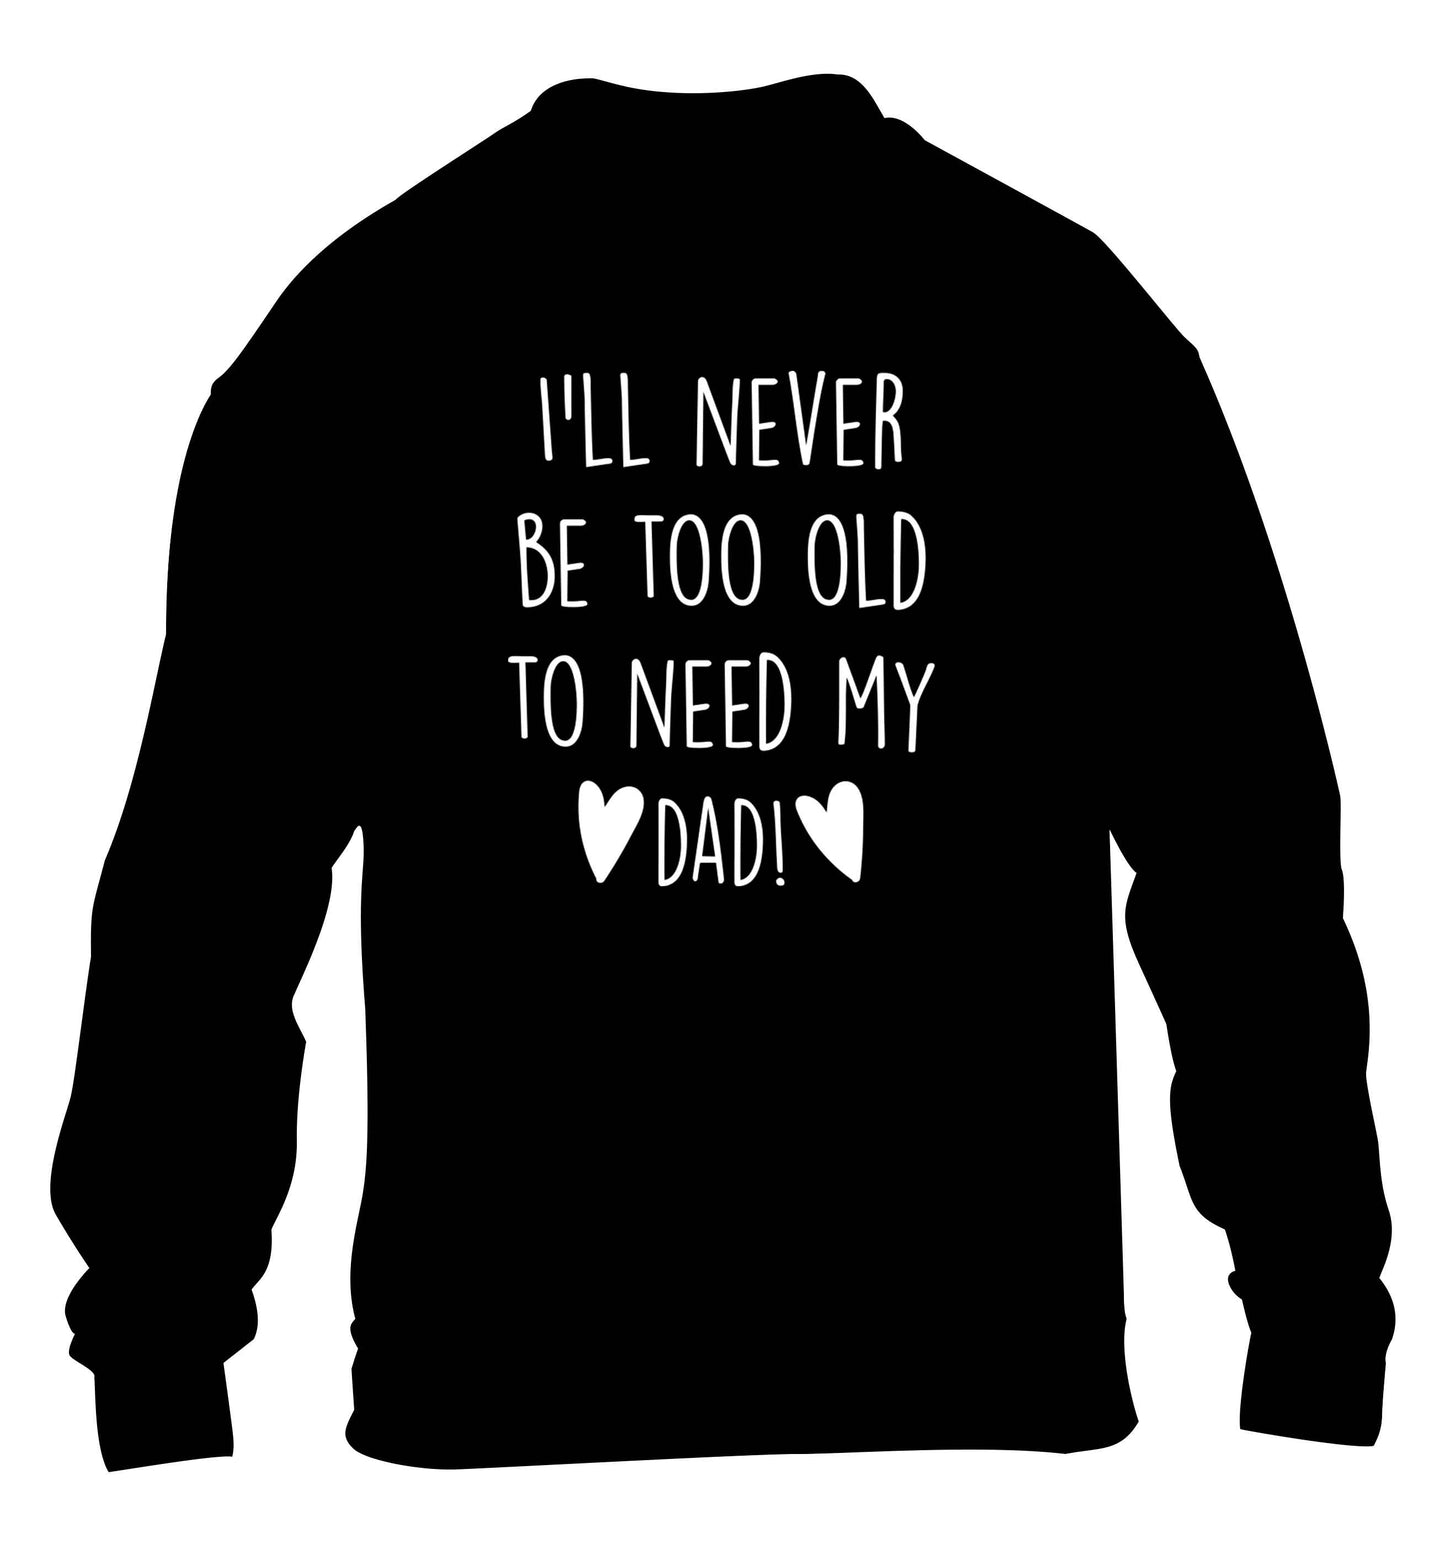 I'll never be too old to need my dad children's black sweater 12-13 Years